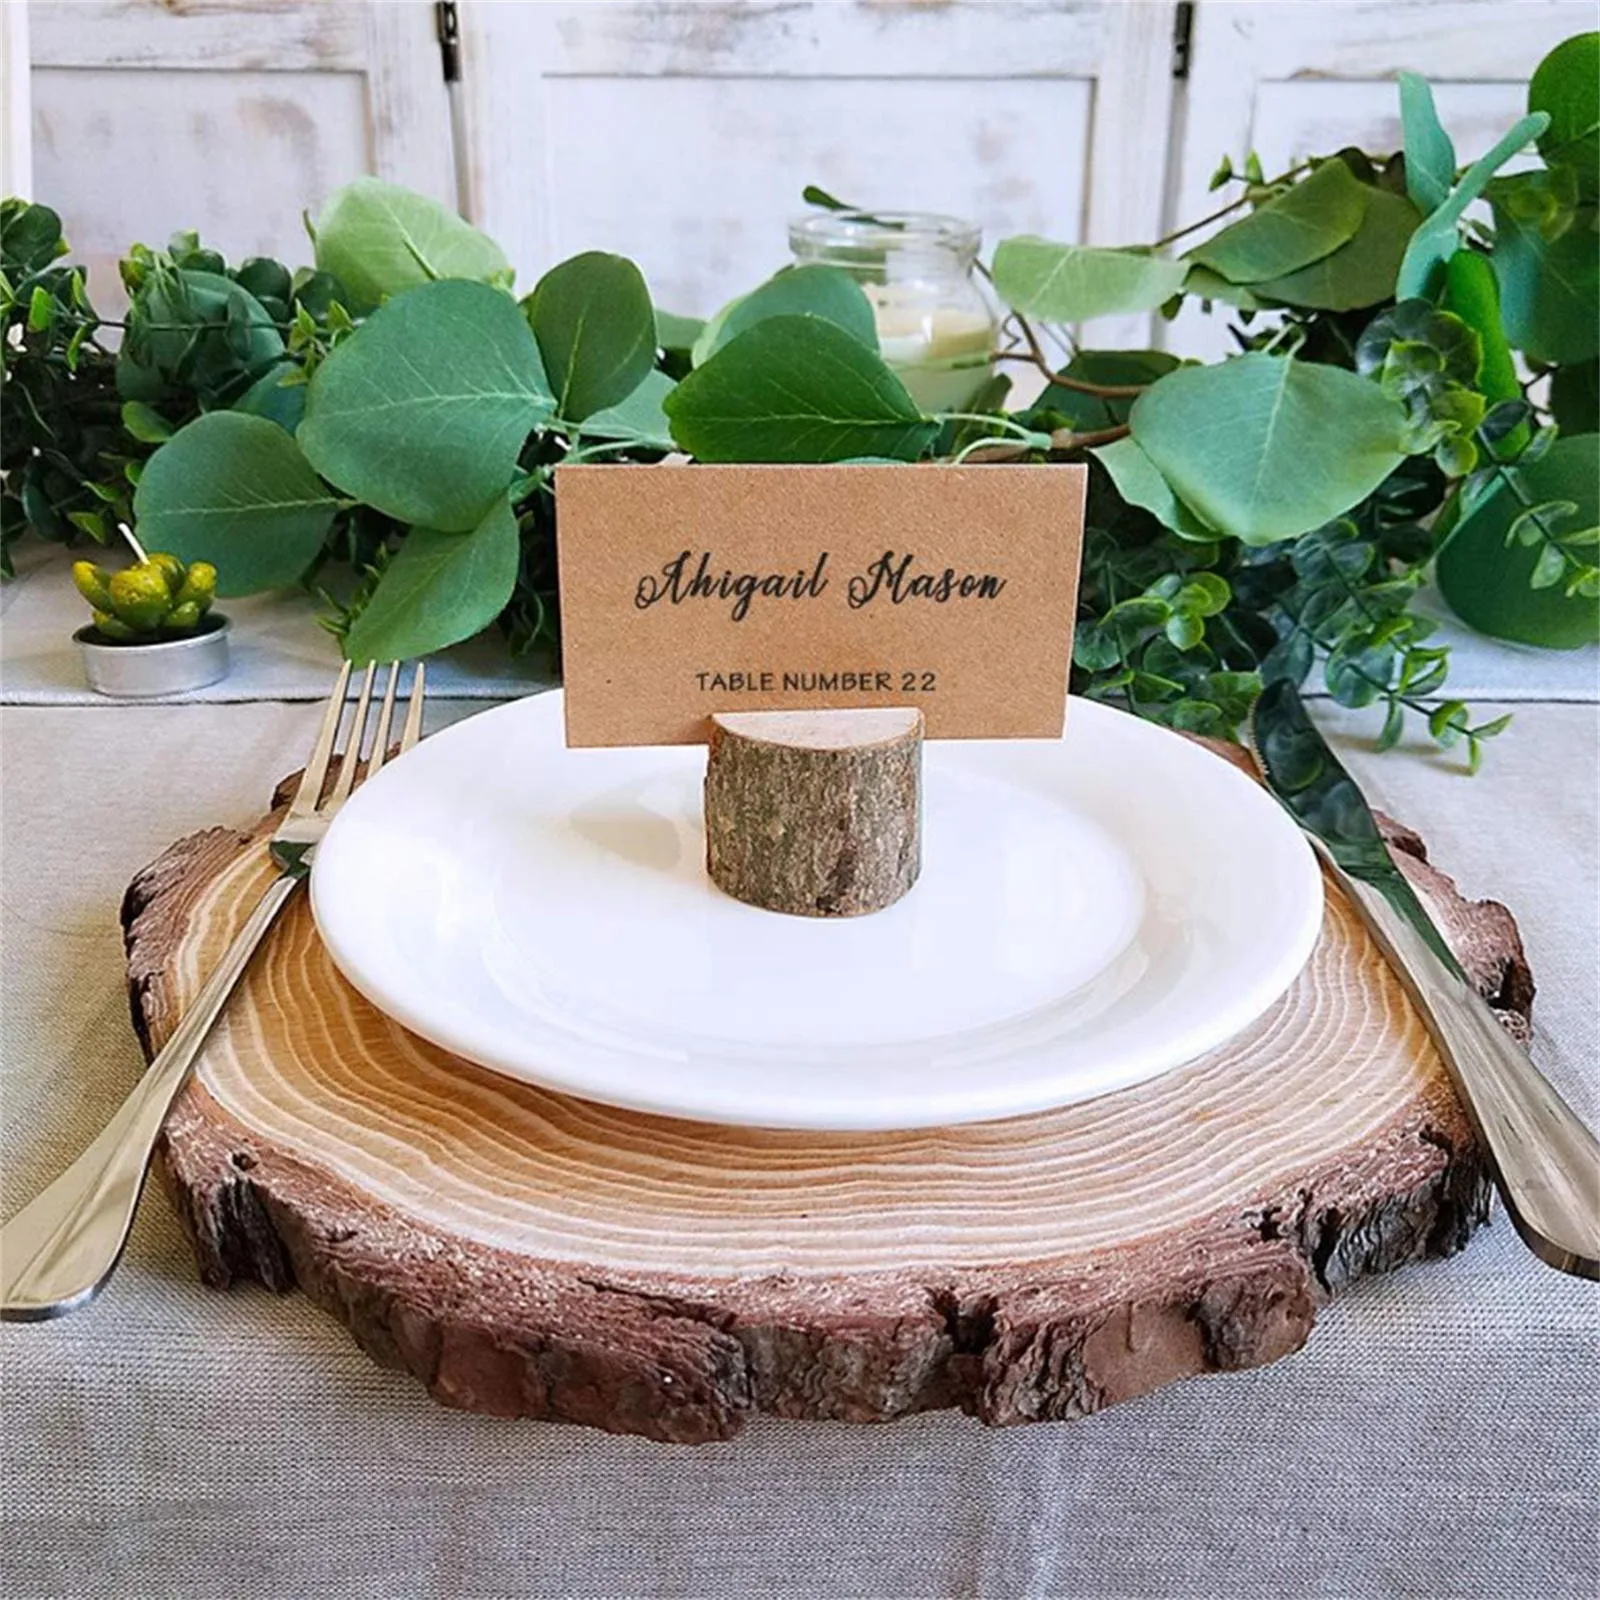 Rustic Wooden Wedding Decor Venue Name Place Card Holders Log Name Card Holders 